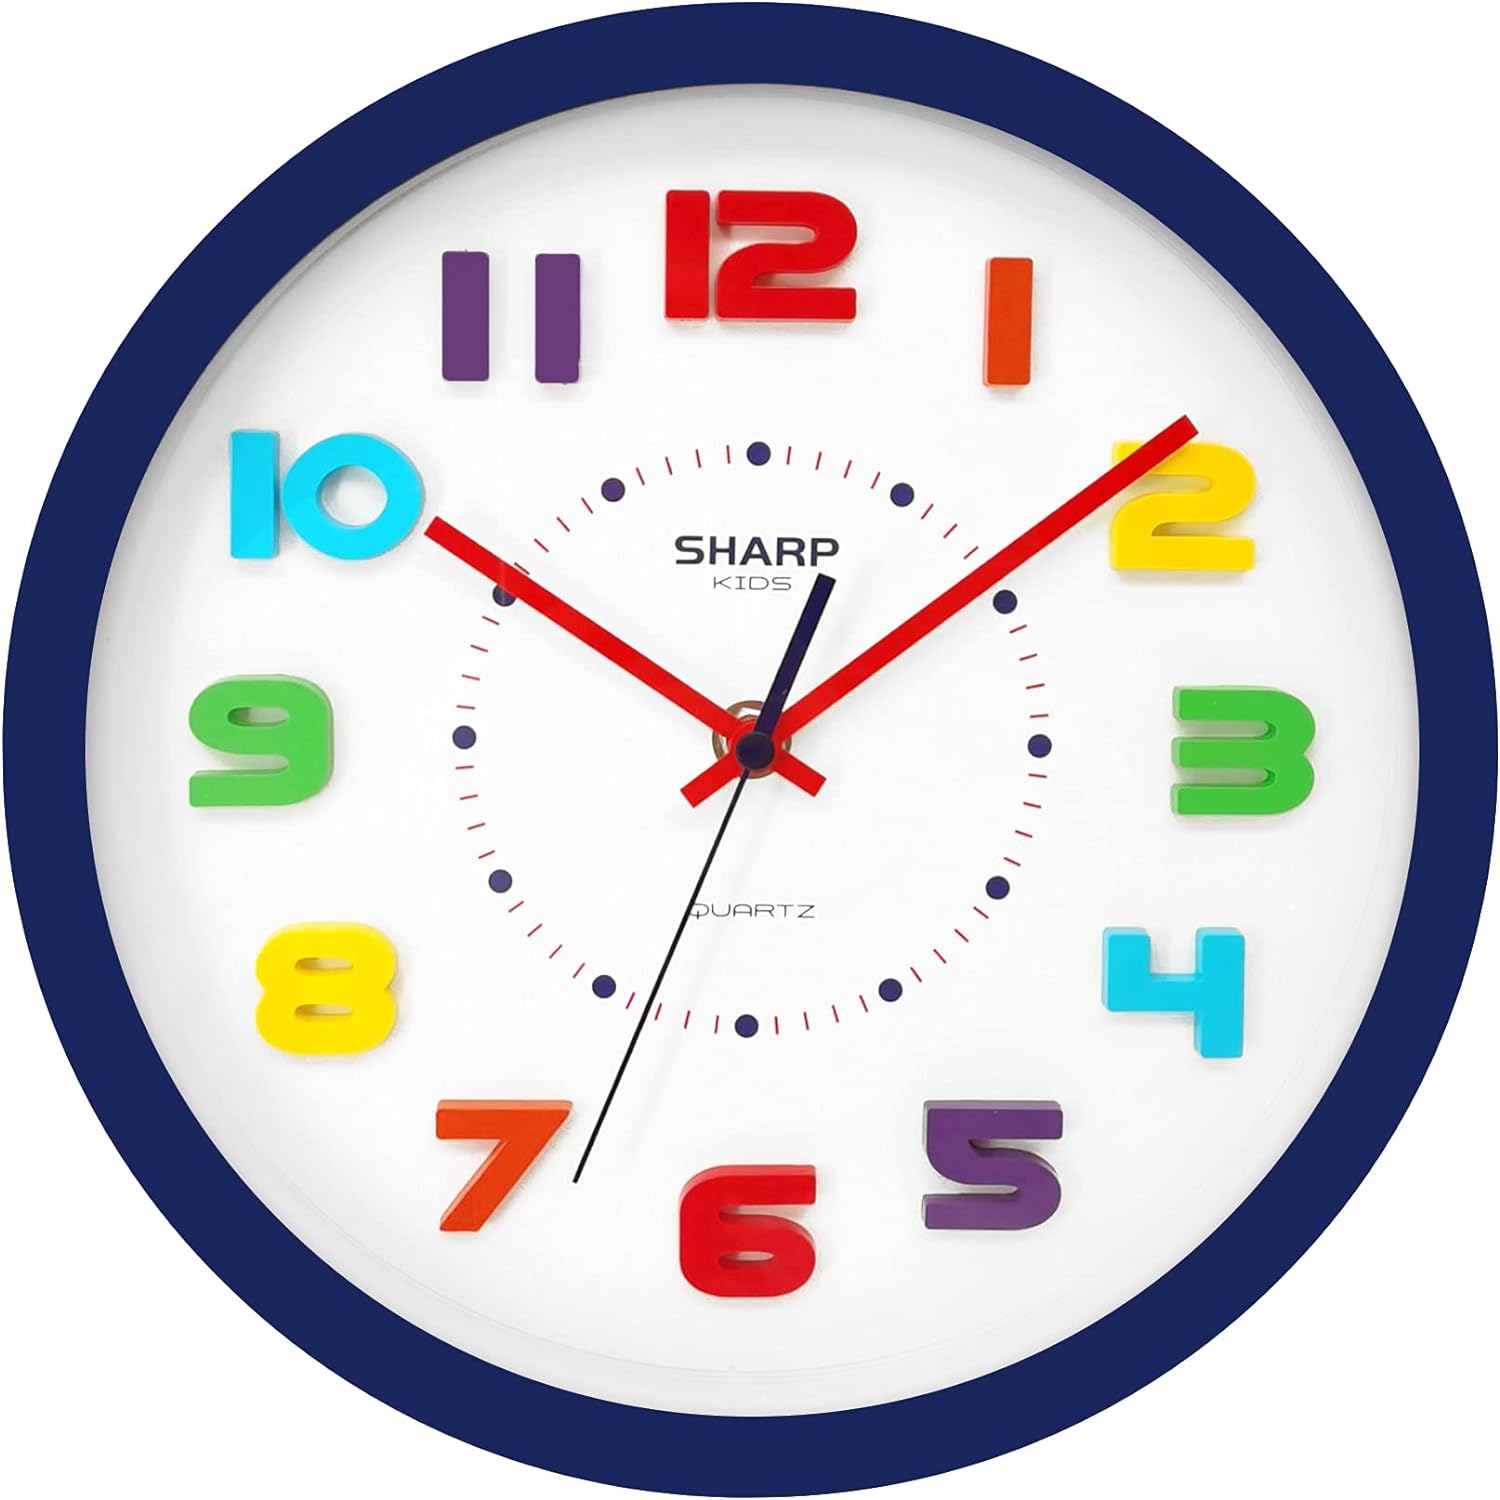 Sharp Colorful Kids Wall Clock 10.6 Inch Silent Non Ticking Quartz Battery Operated, Easy to Read 3D &#226;&#128;&#156;Re